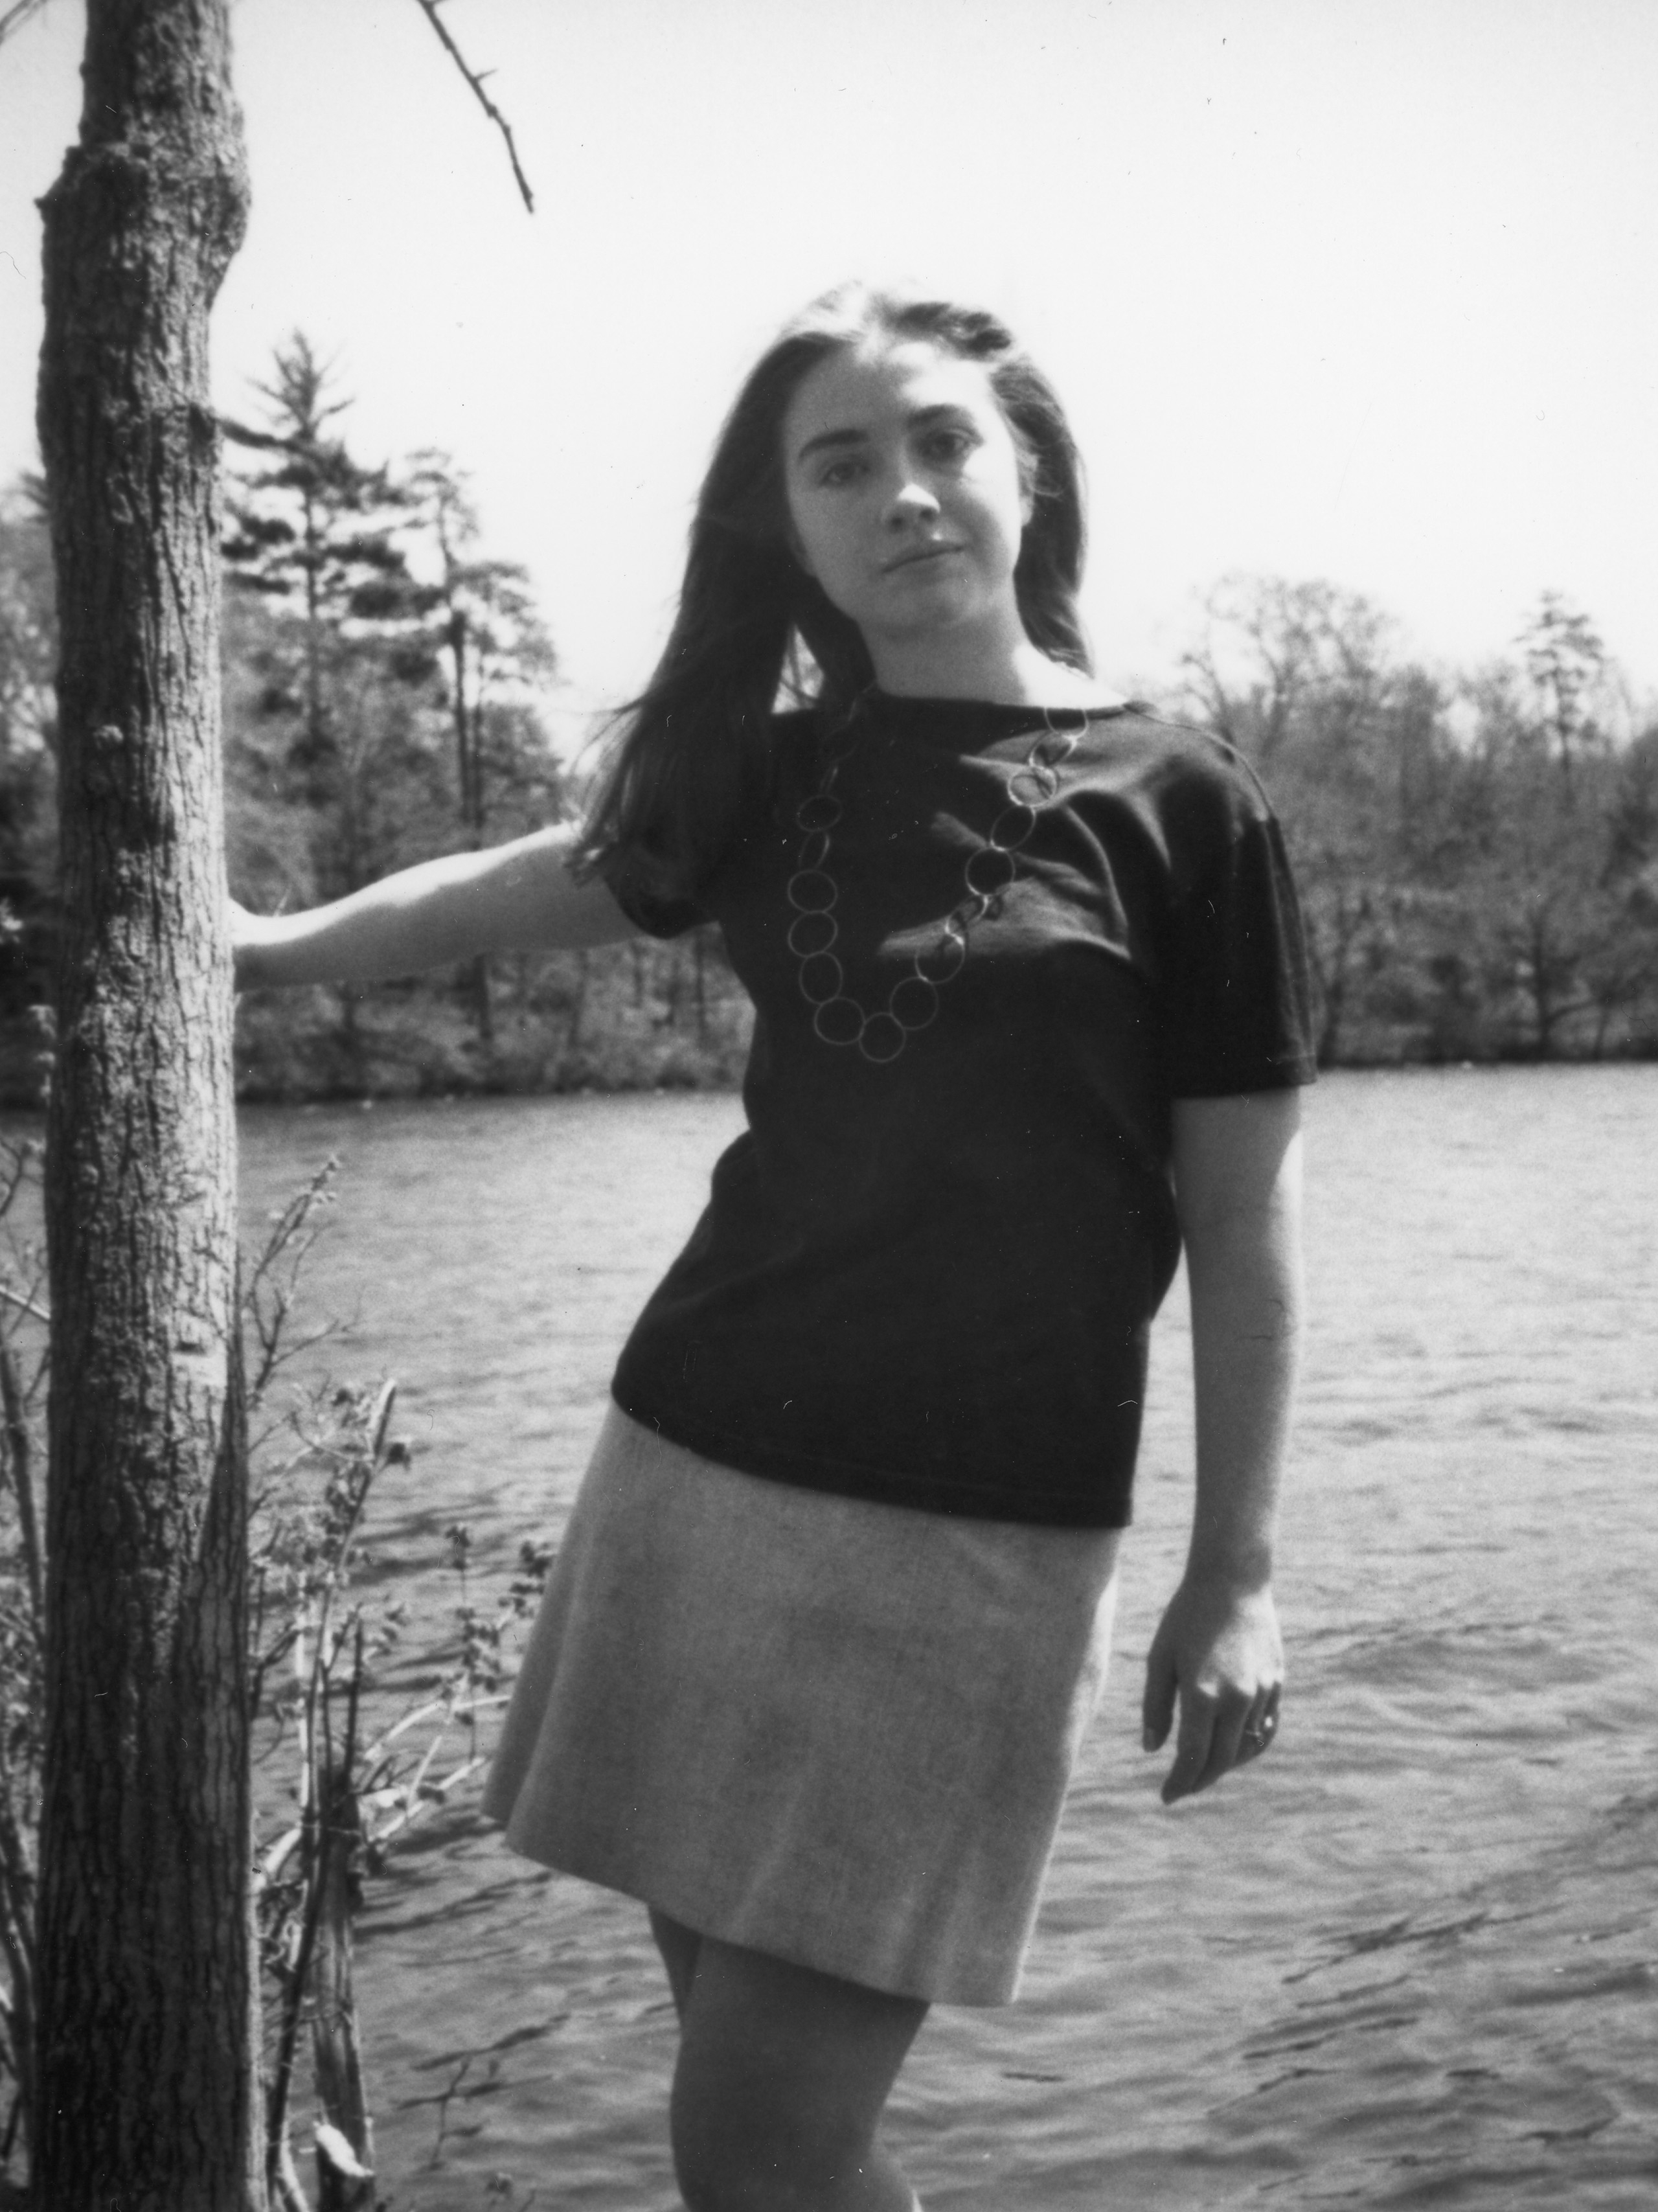 Hillary at Lake Waban on the Wellesley College Campus, 1969.